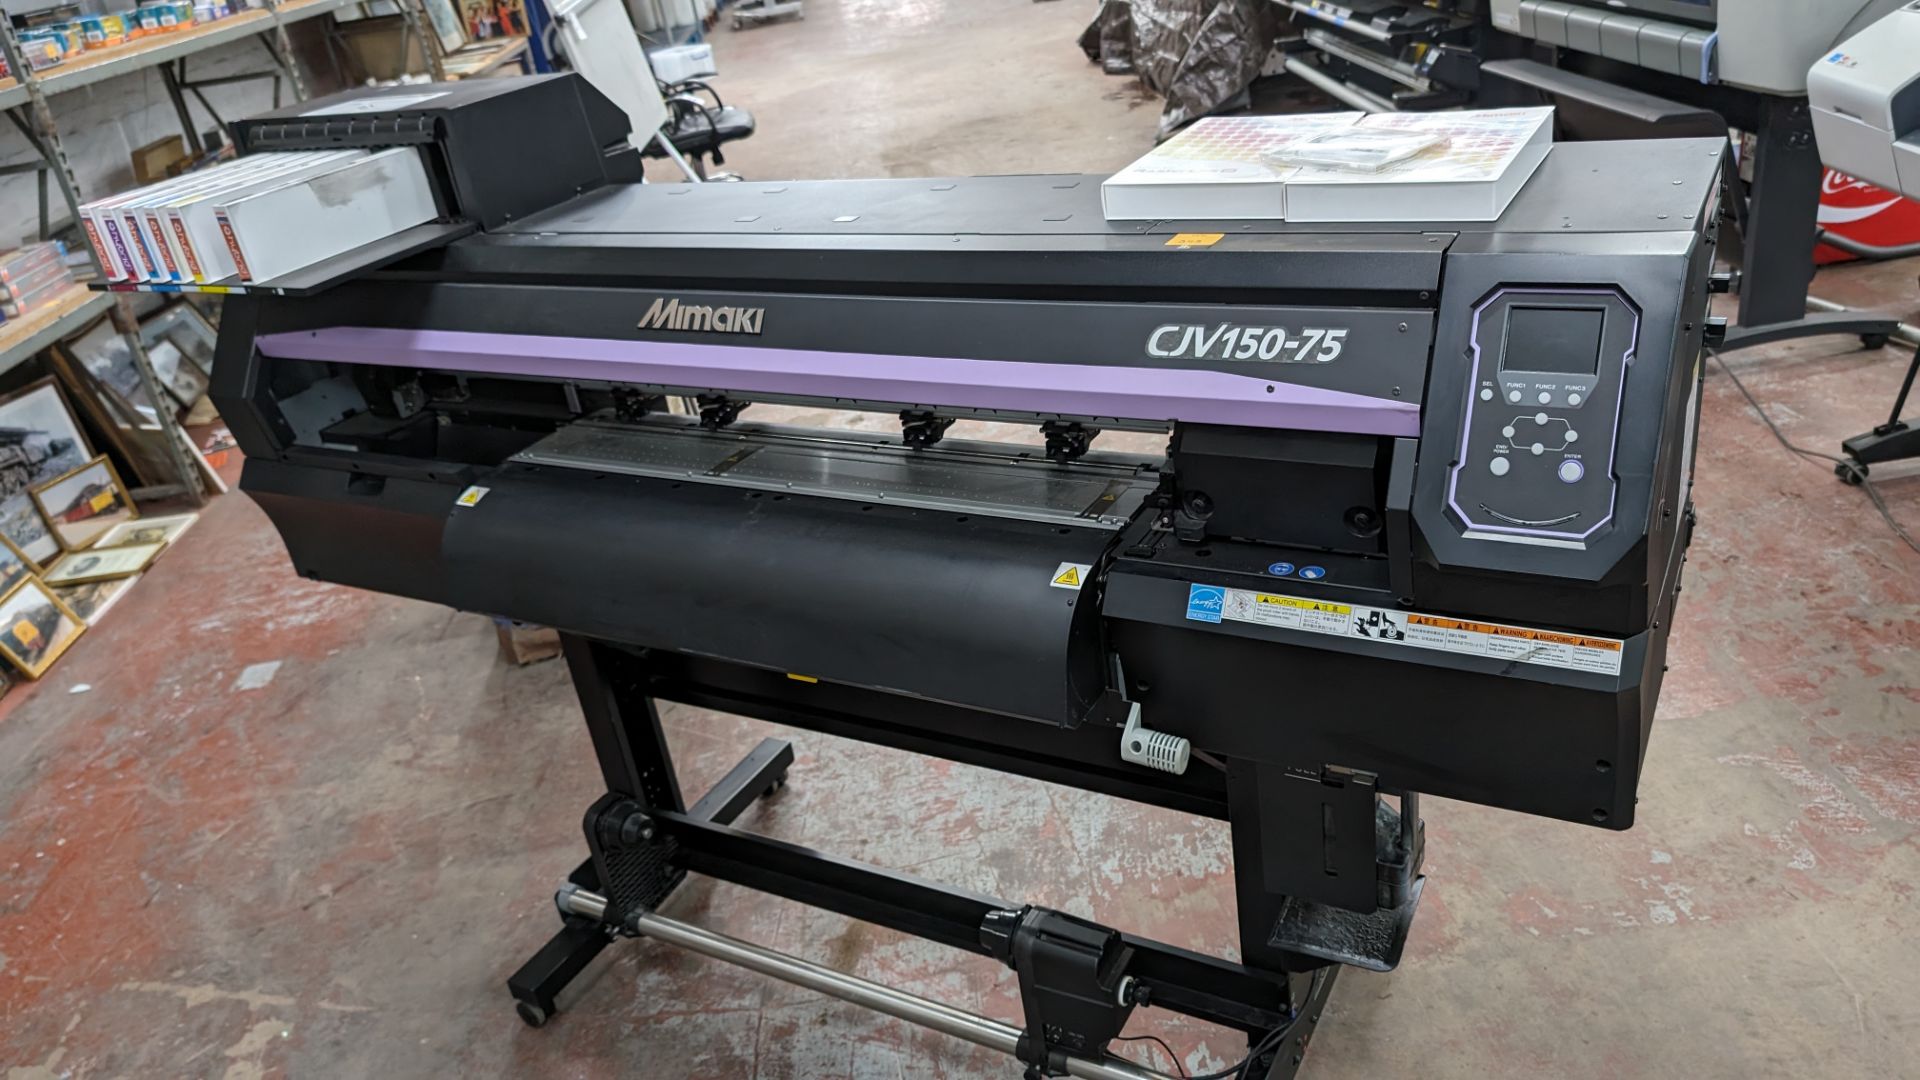 Mimaki CJV150-75 wide format printer including quantity of software as pictured, 800mm max print wid - Image 21 of 21